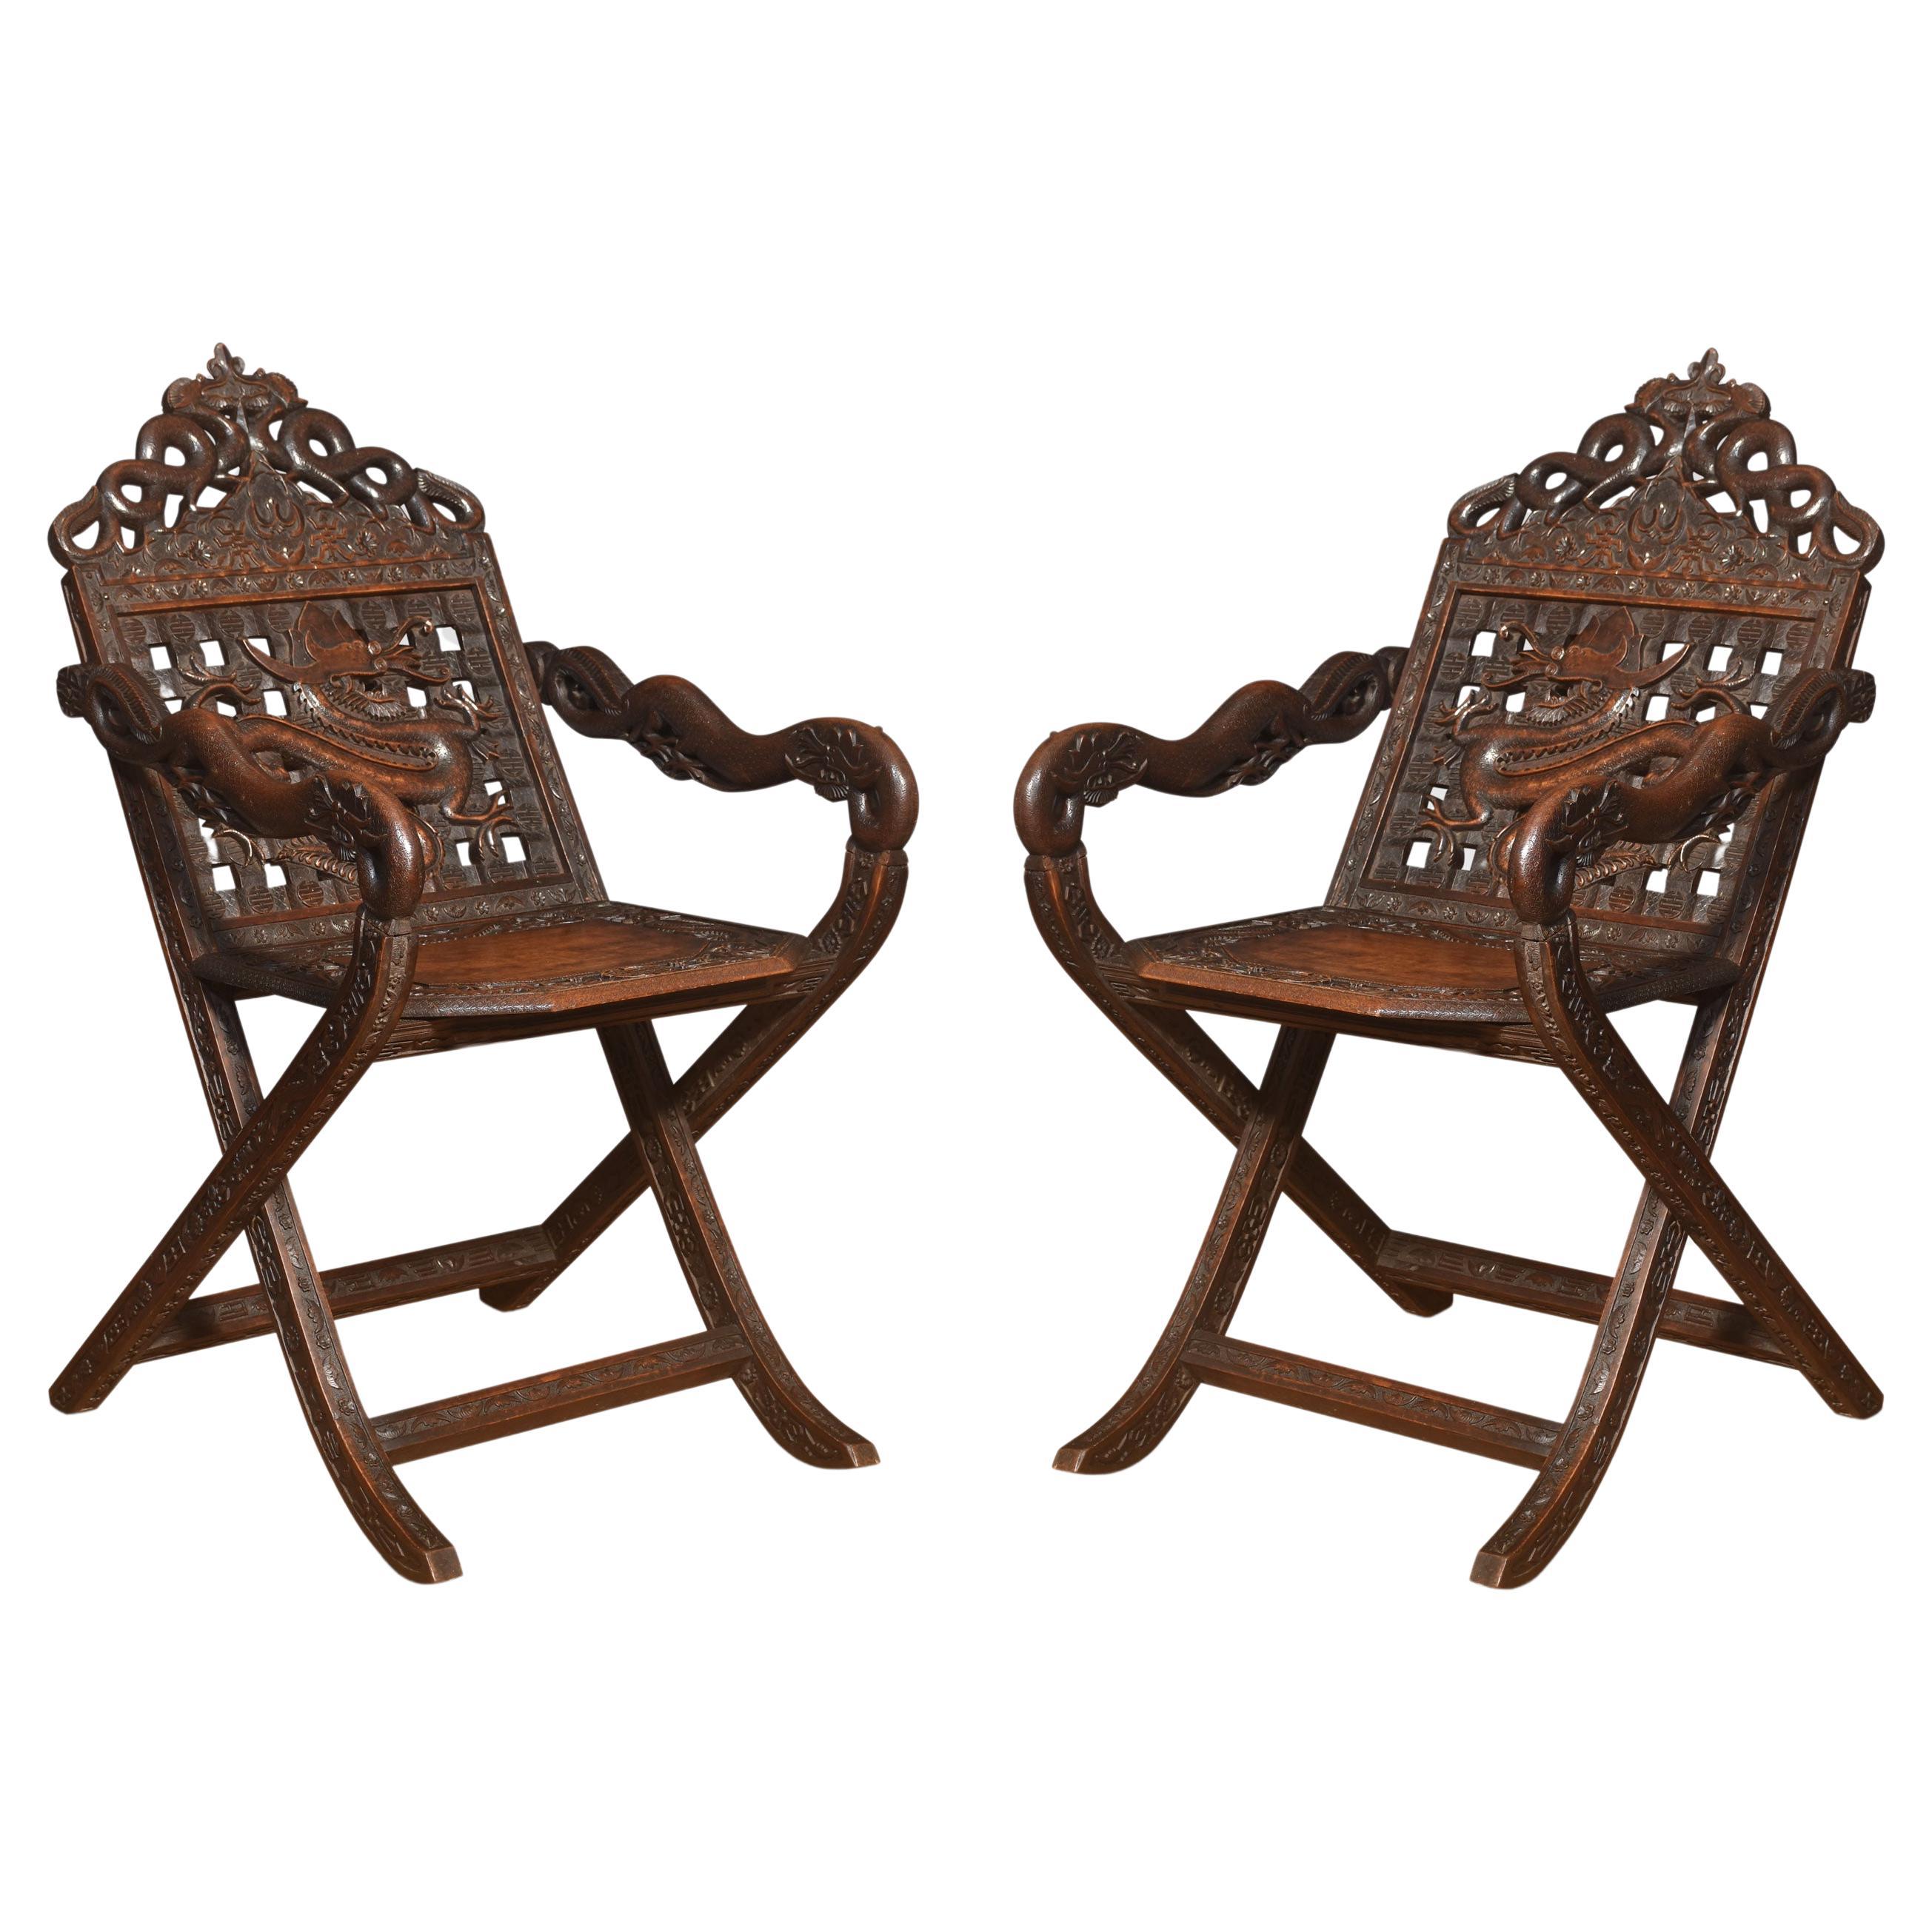 Pair of 19th century Chinese folding armchairs